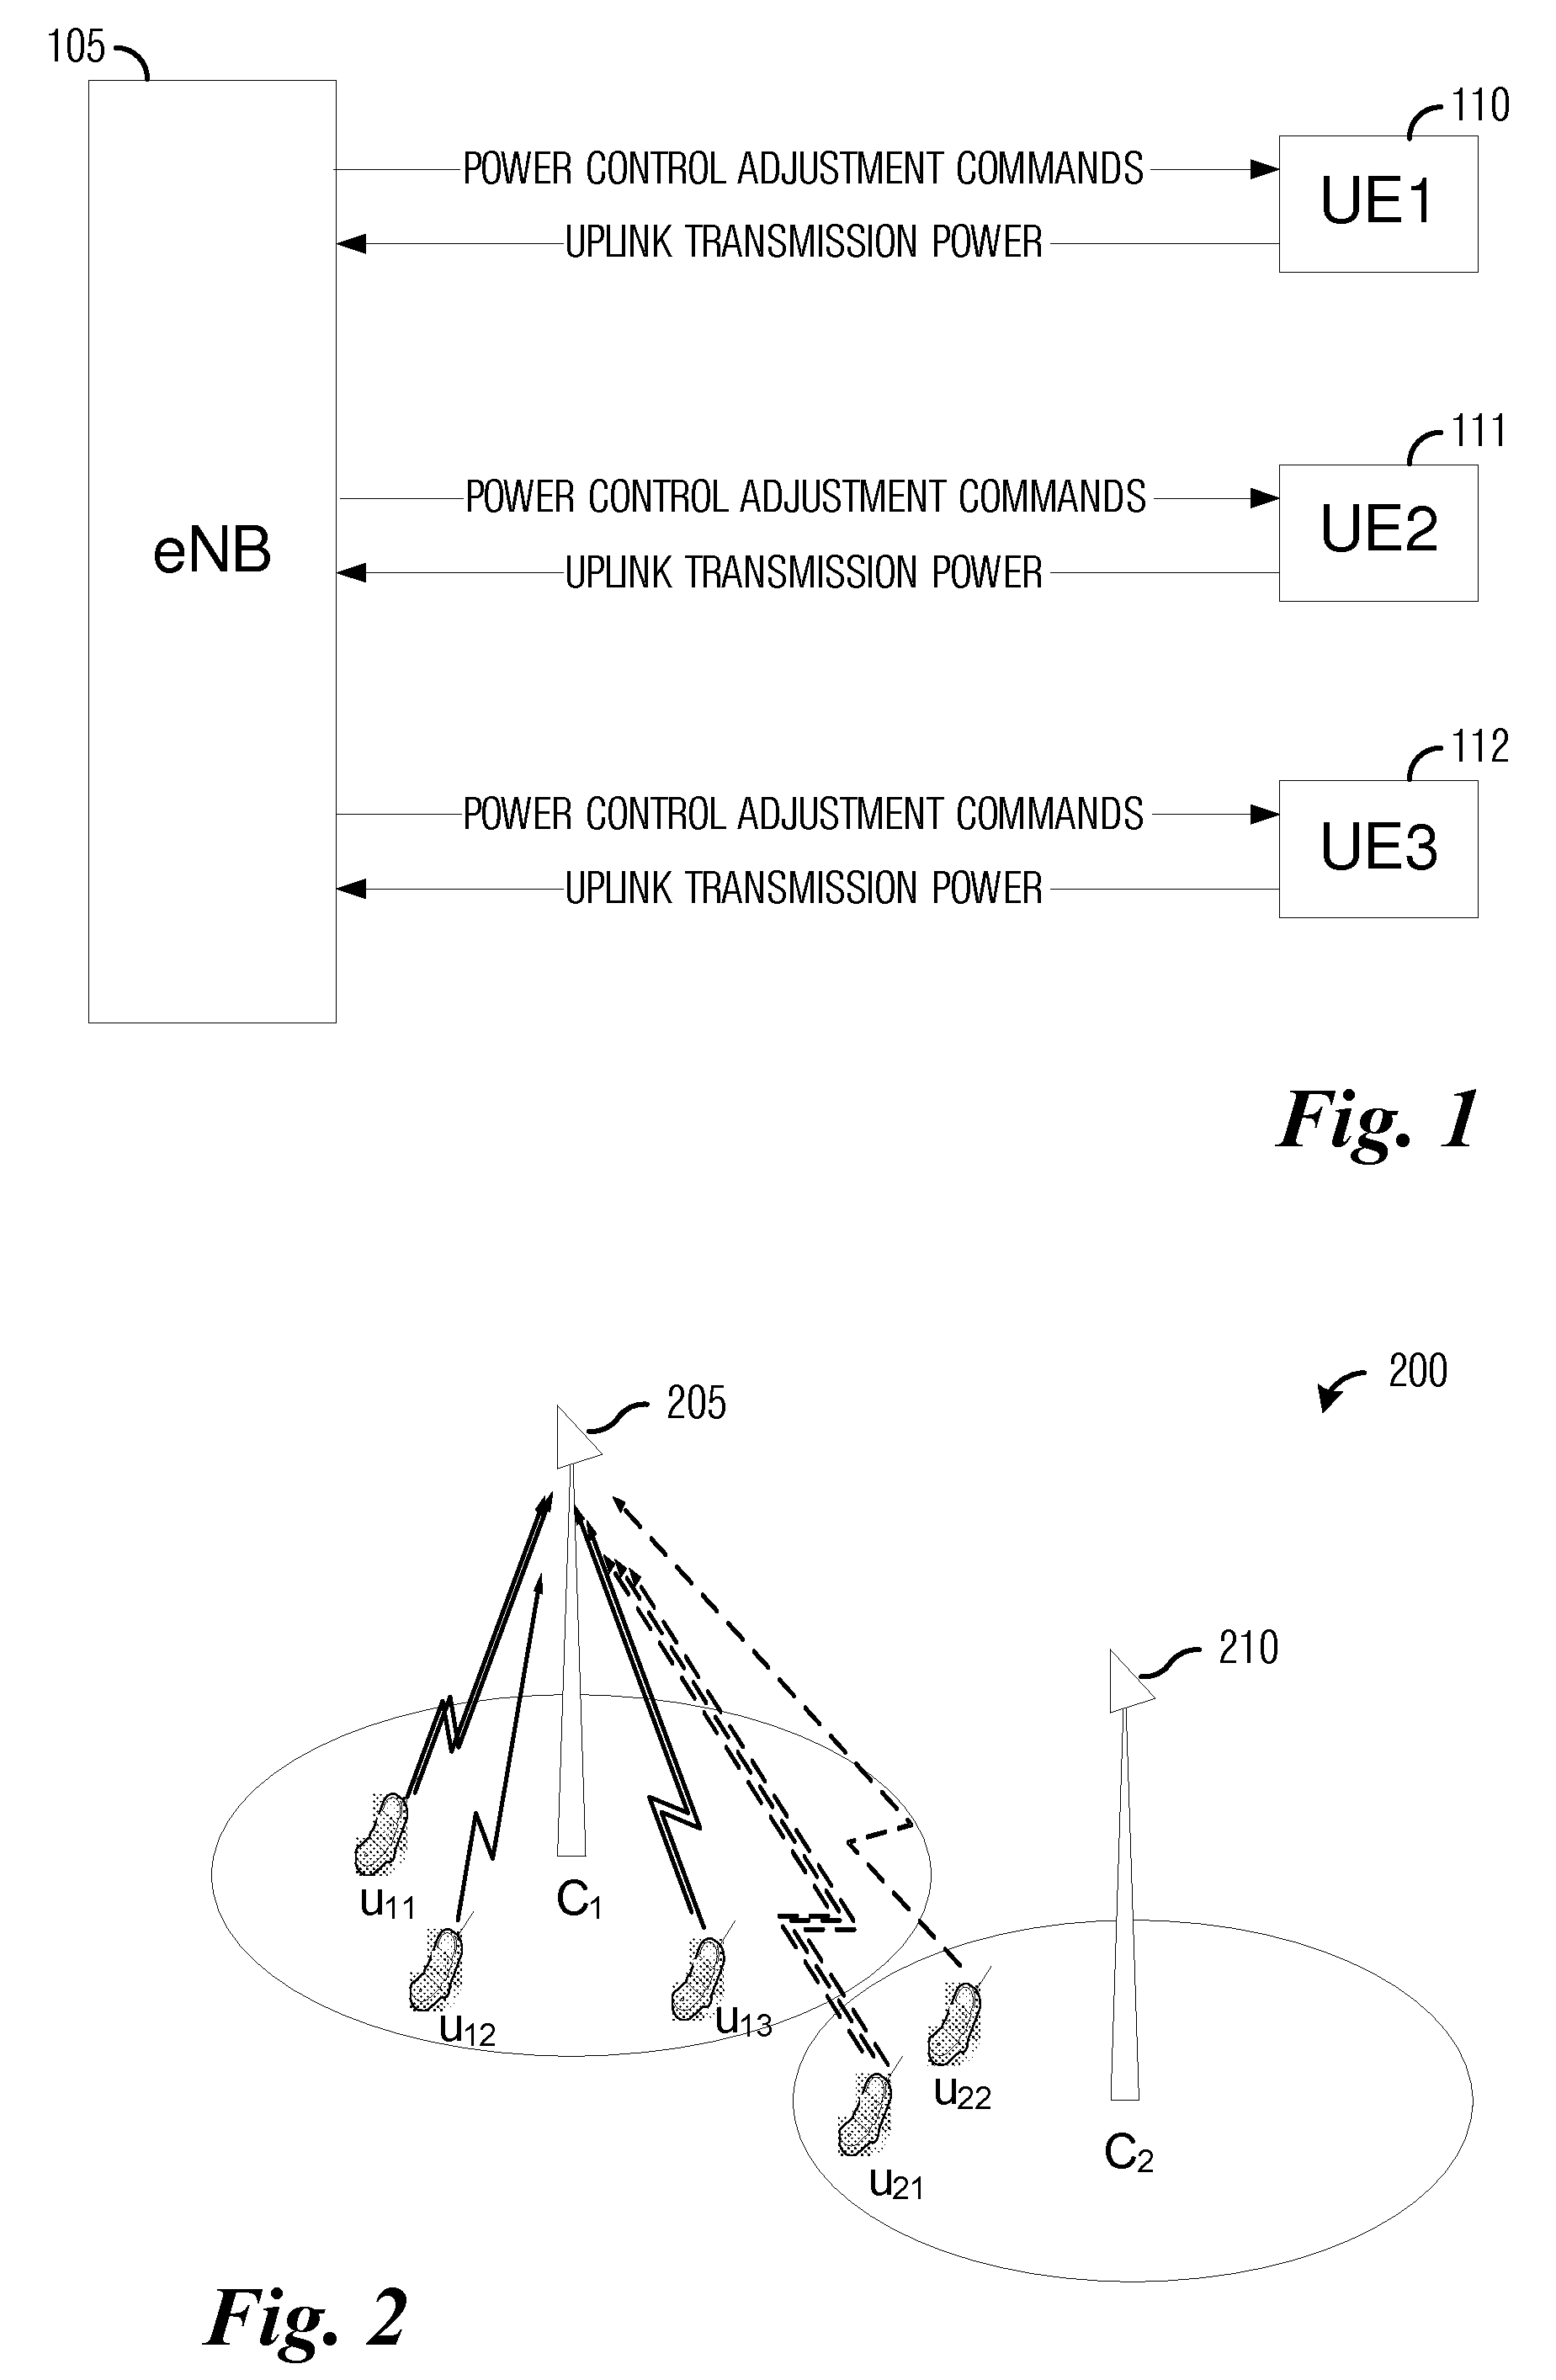 System and Method for Uplink Power Control in a Wireless Communications System